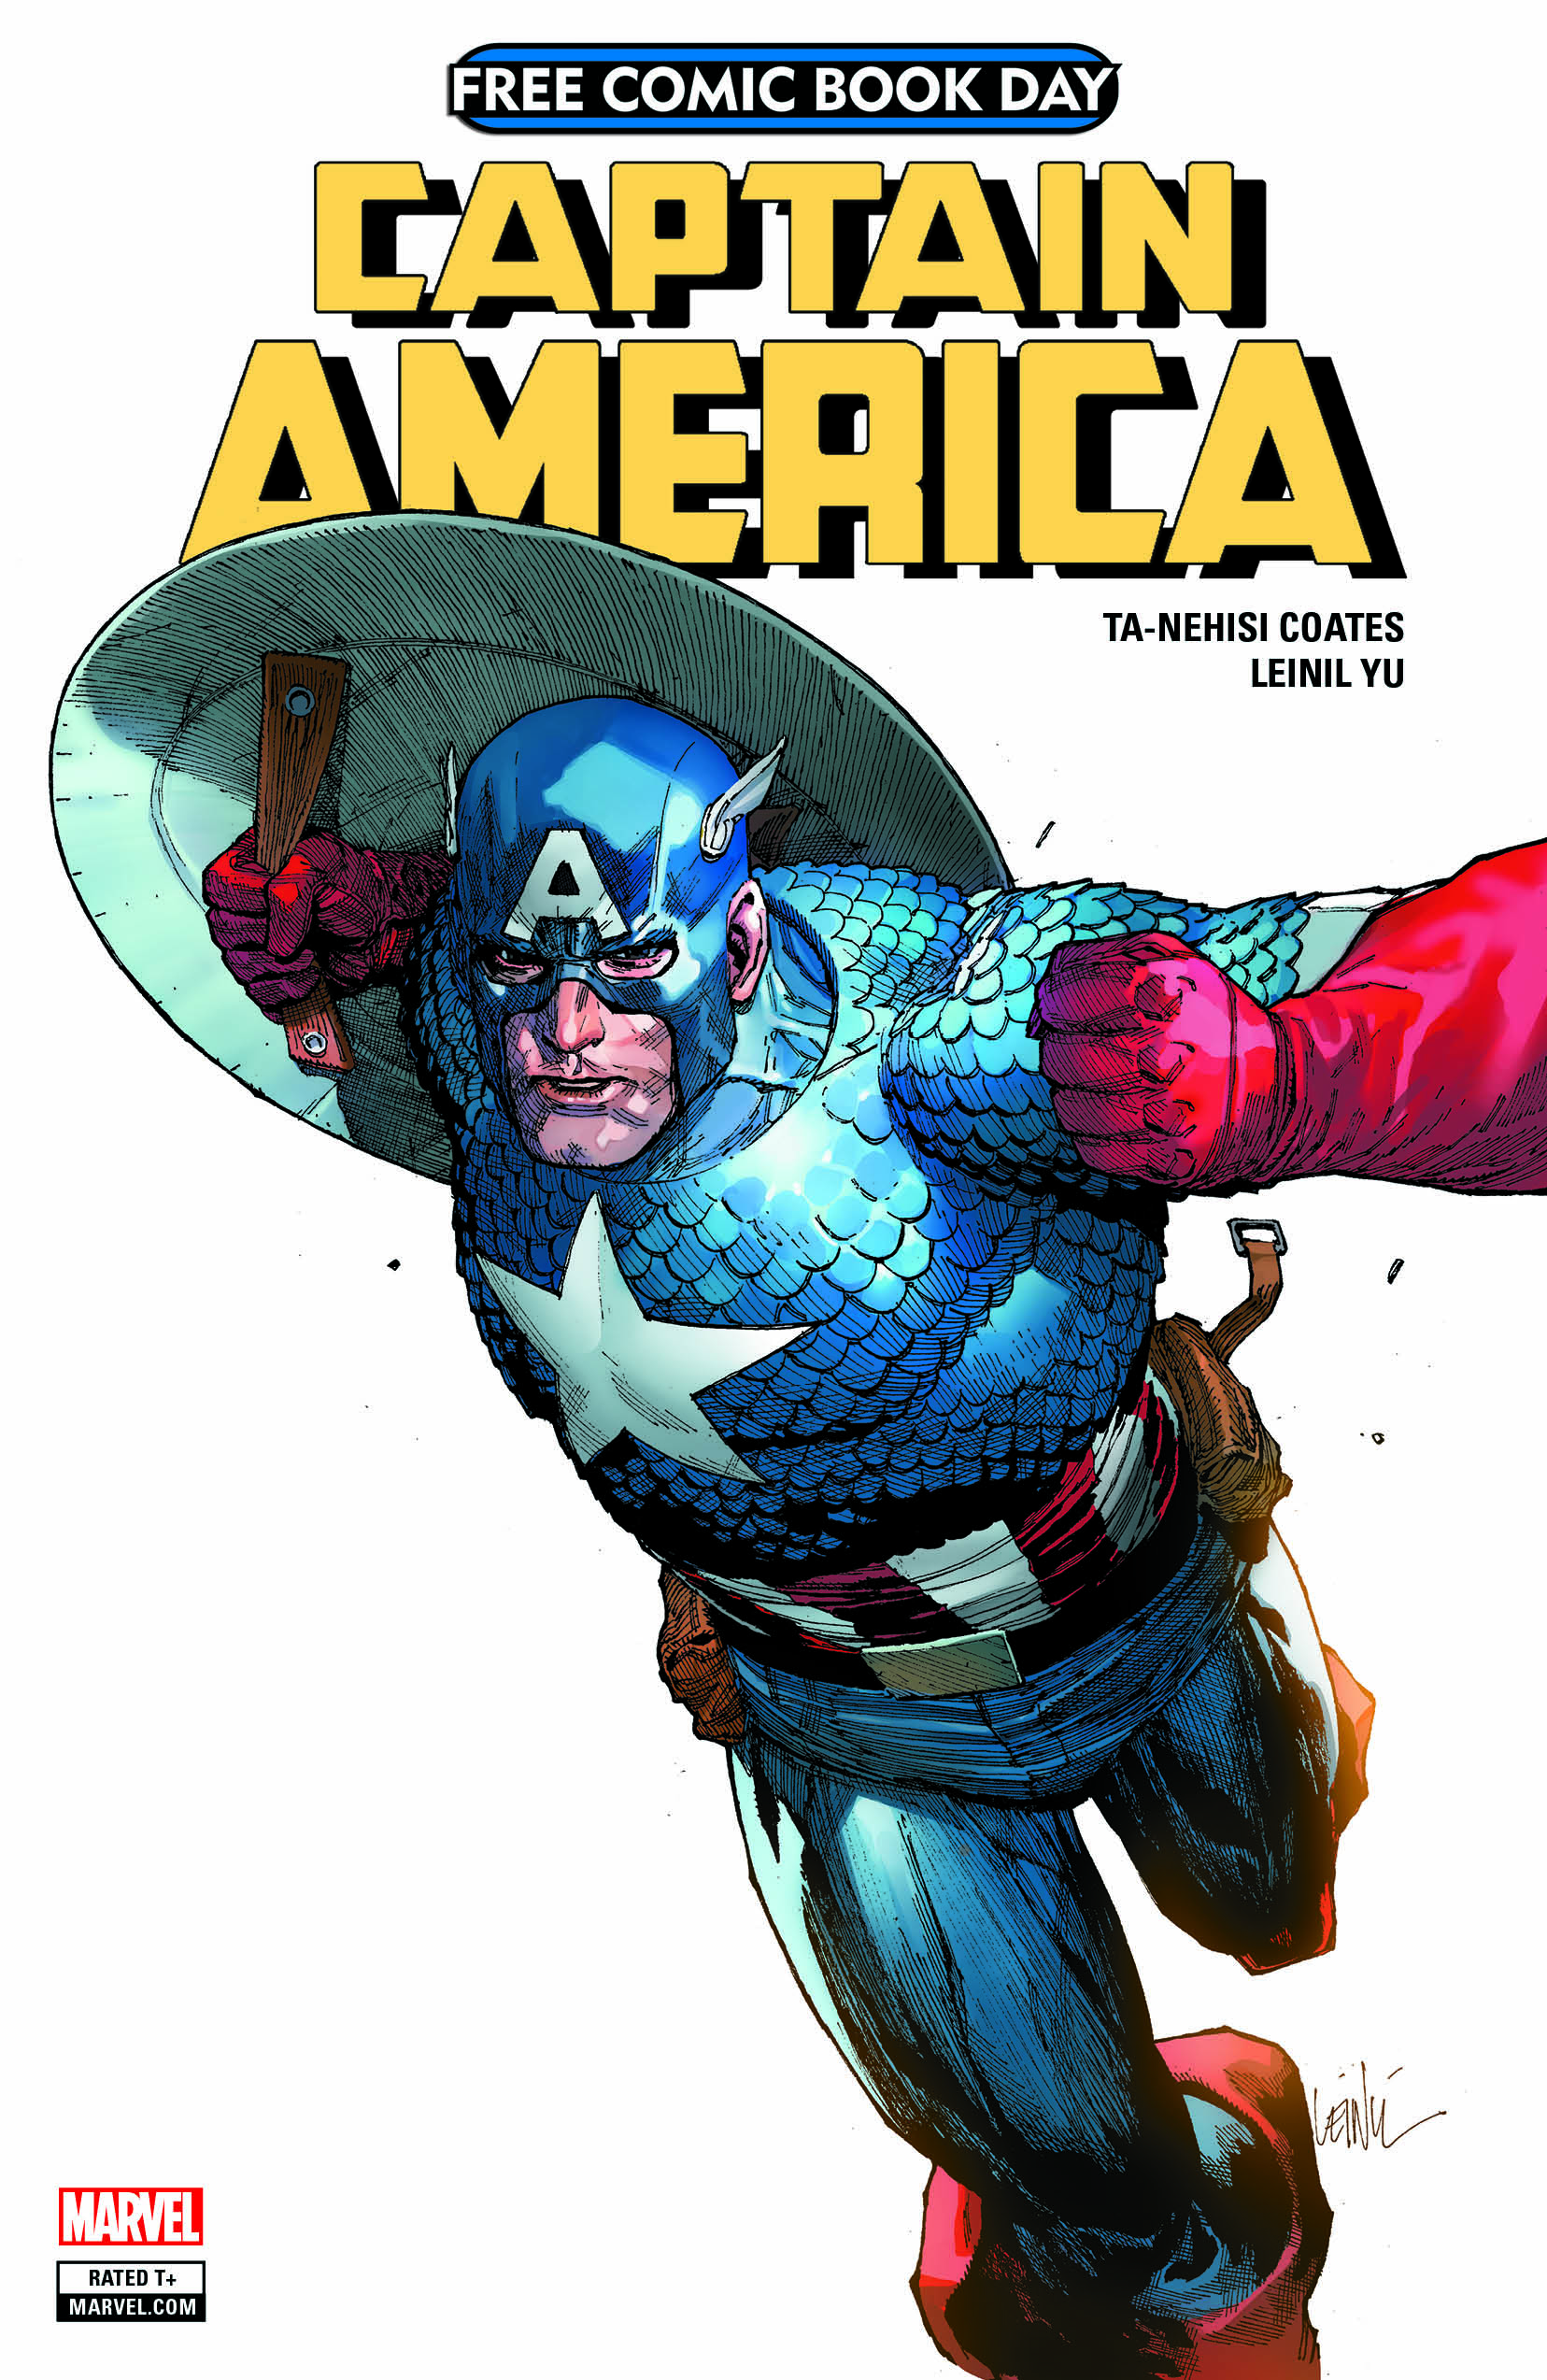 New Captain America Story Coming On Free Comic Book Day - Free Comic